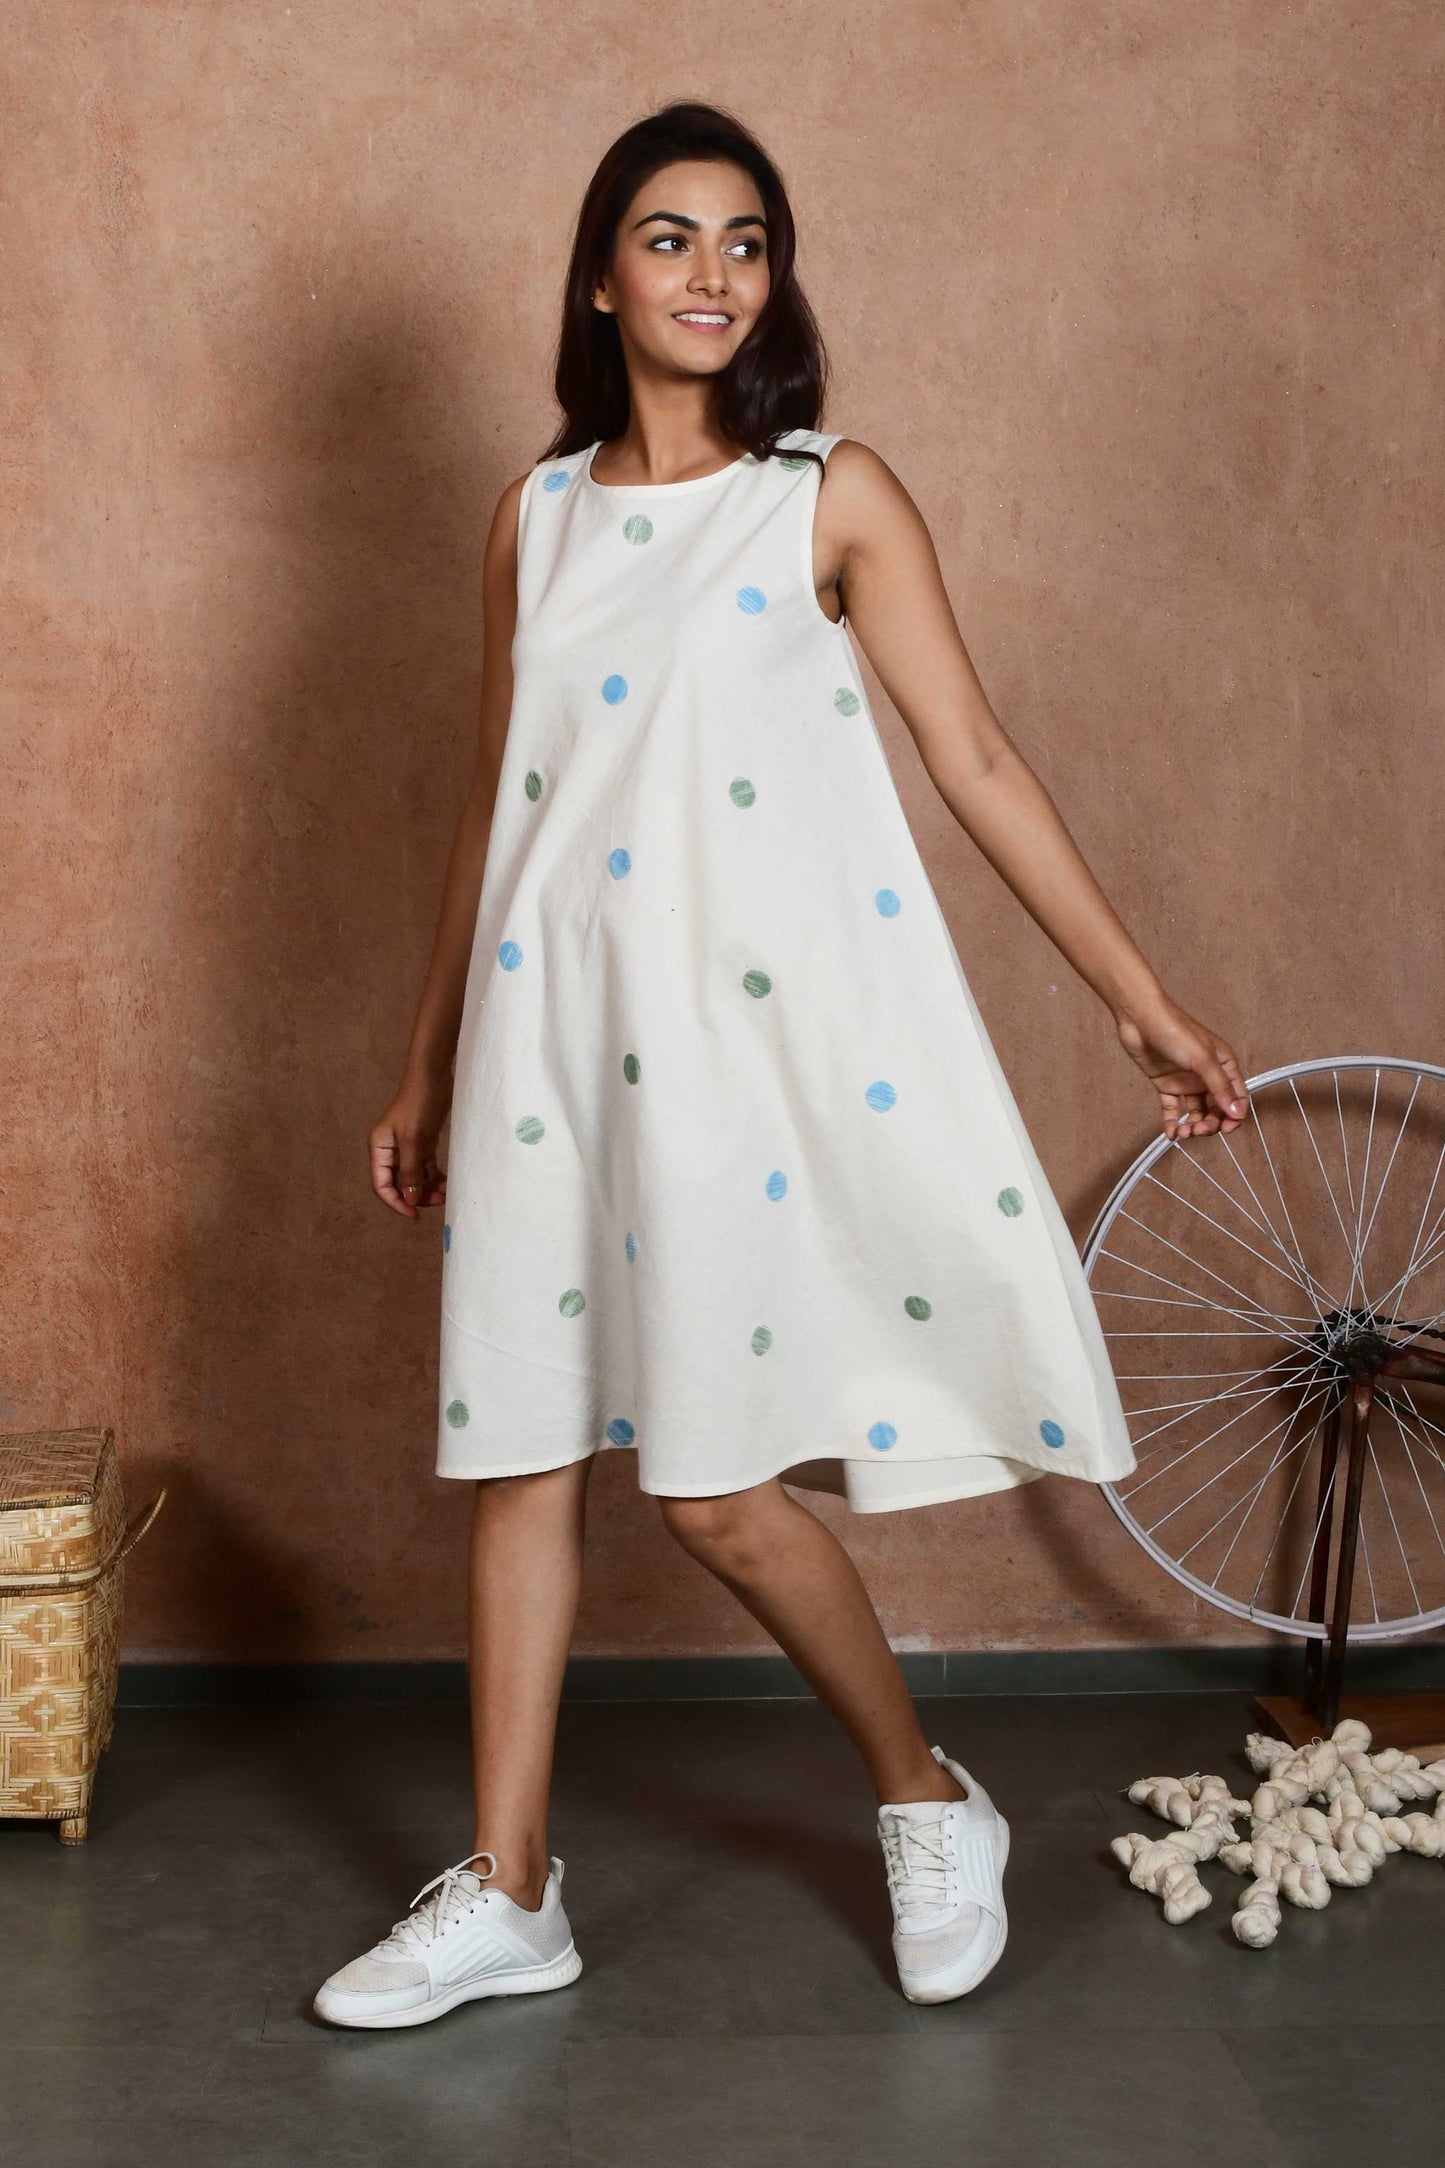 Side pose of an indian model wearing a handspun handloom cotton sleeveless dress that is knee length with green and blue polka dot patches.